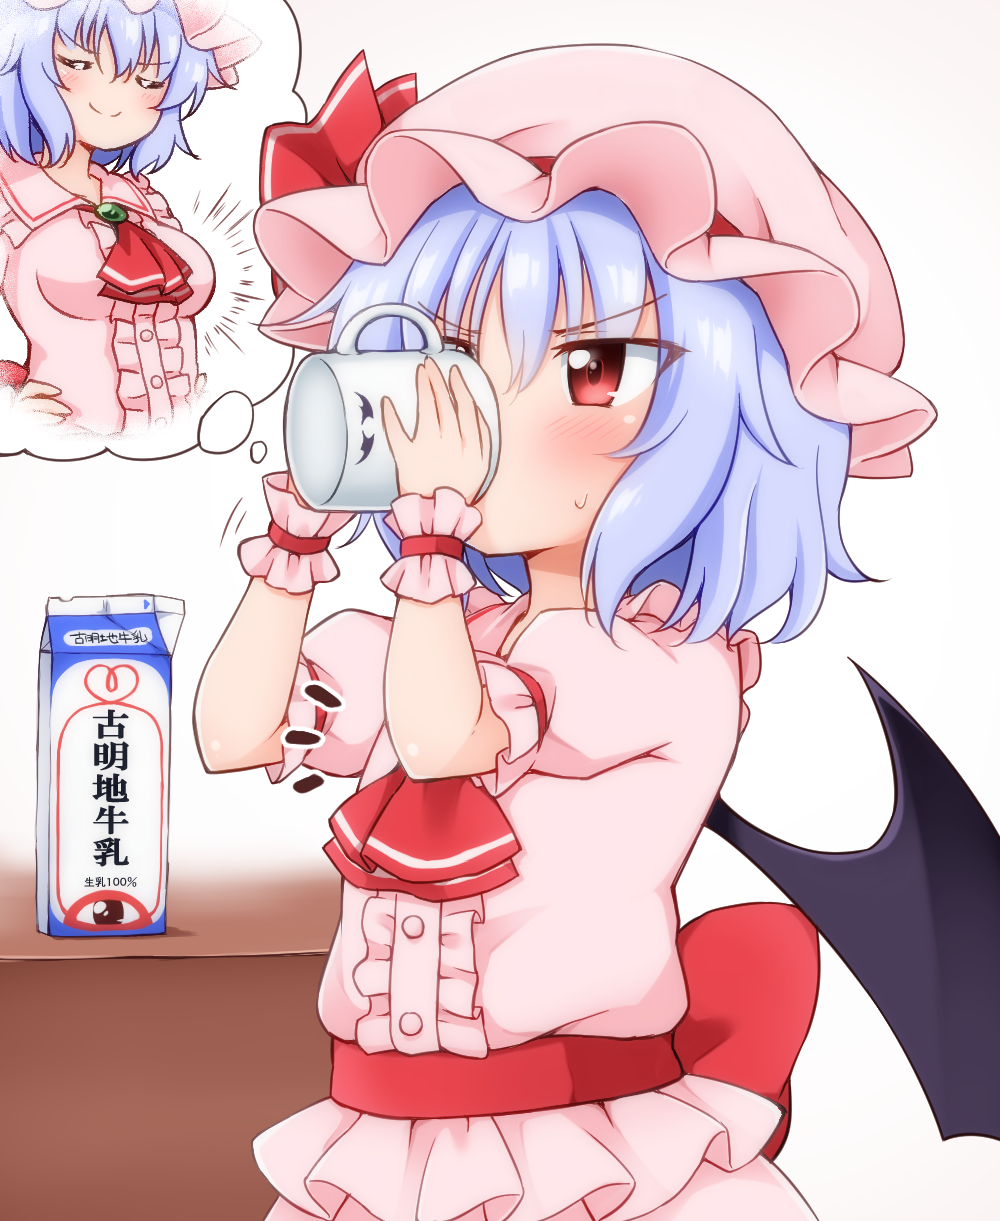 &gt;:) 1girl ascot bat_wings blue_hair blush breasts brooch closed_eyes commentary_request cup dress drink hands_on_hips hat hat_ribbon highres holding holding_cup holding_mug jewelry medium_breasts milk milk_carton mob_cap mug pink_dress pink_hat puffy_short_sleeves puffy_sleeves red_eyes red_neckwear red_ribbon red_sash remilia_scarlet ribbon short_hair short_sleeves simple_background solo suwa_yasai sweatdrop table thought_bubble touhou translation_request v-shaped_eyebrows white_background wings wrist_cuffs